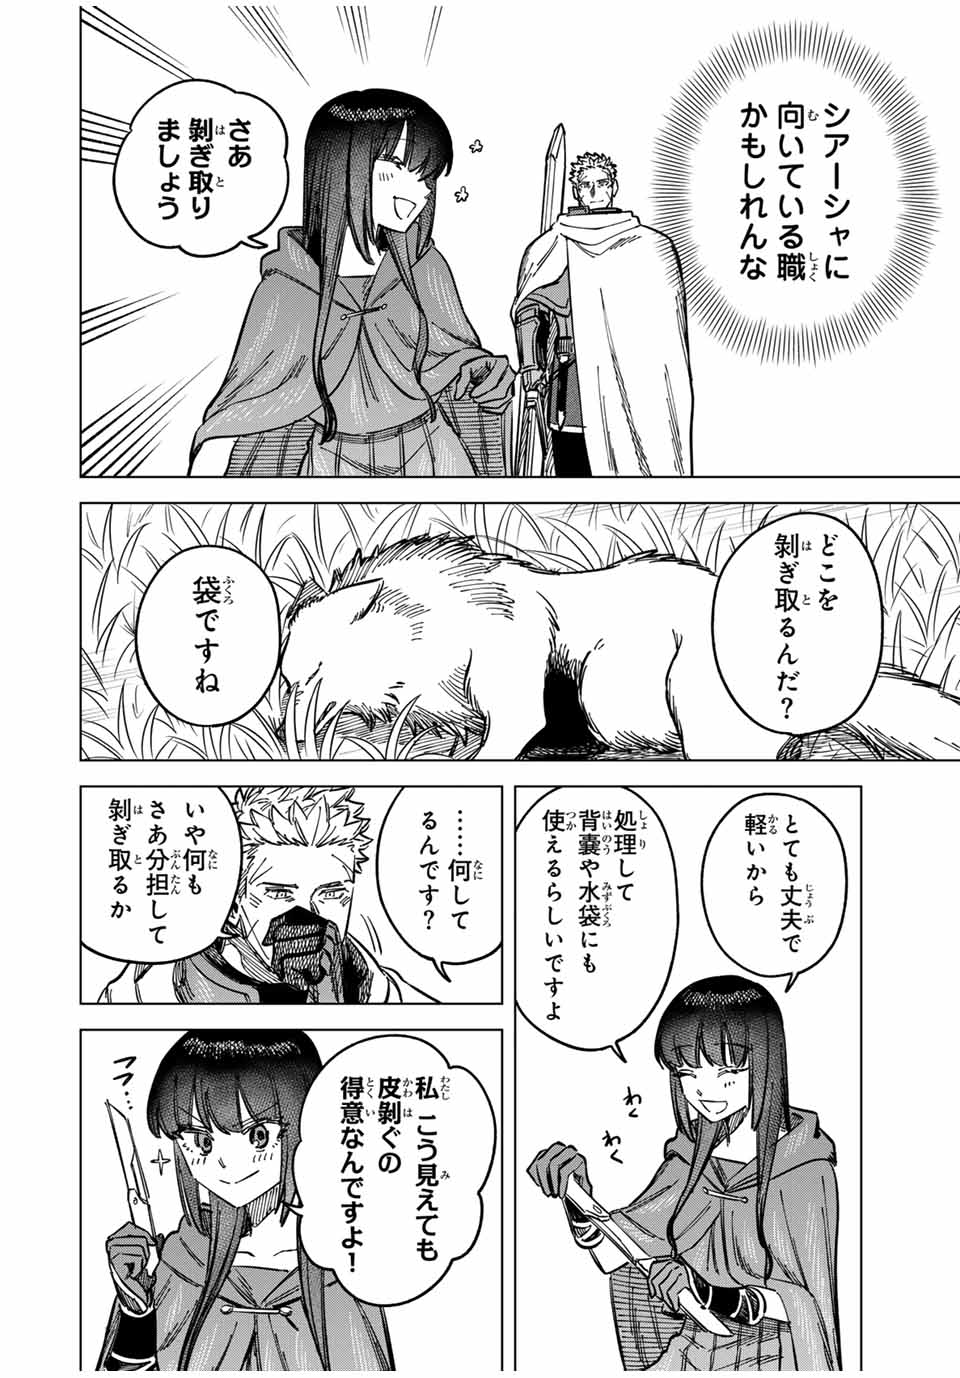 Witch and Mercenary 魔女と傭兵 第5.5話 - Page 10